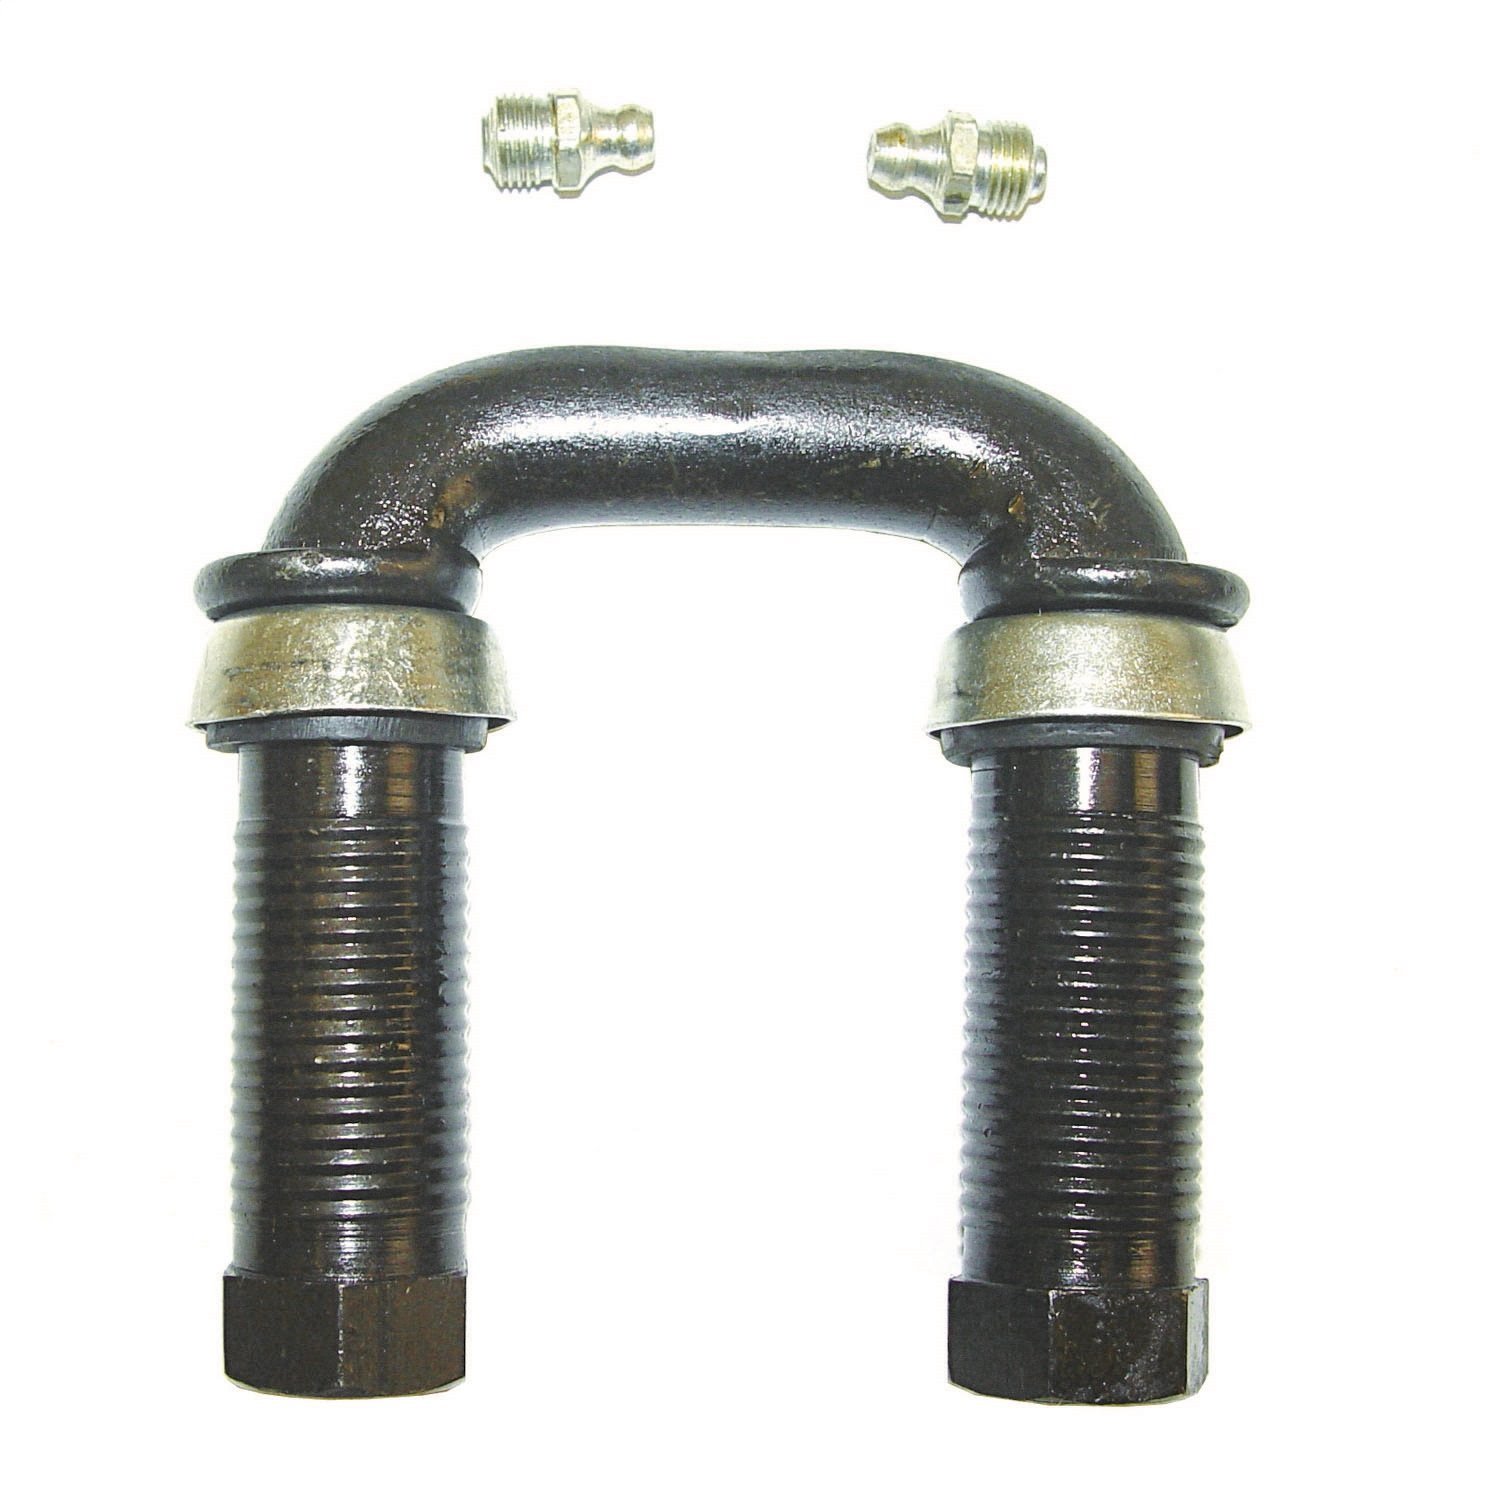 Leaf Spring Shackle Kit for Select 1941-1968 Willys Jeep Models [U-Style, Left Hand Thread]